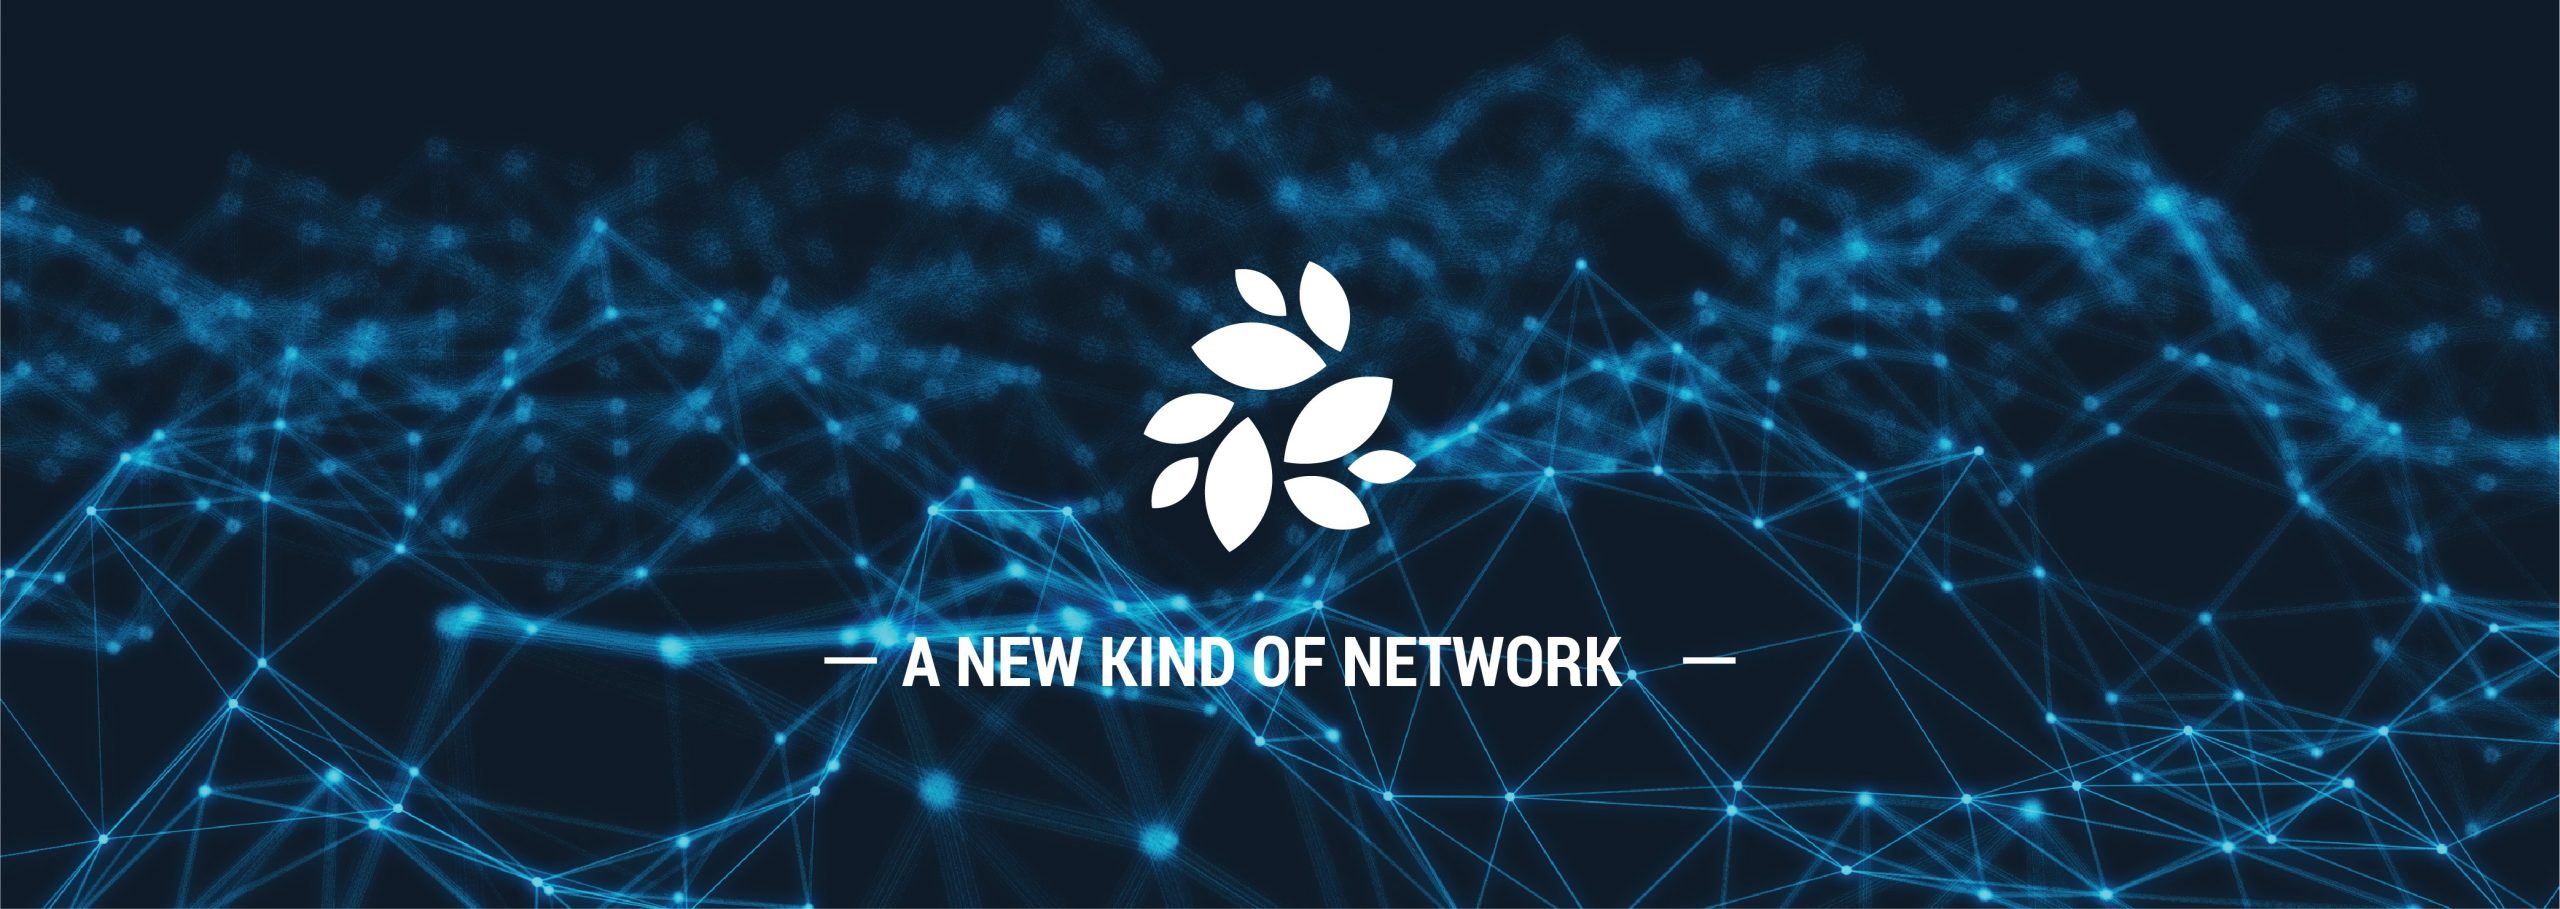 nknetwork_cover